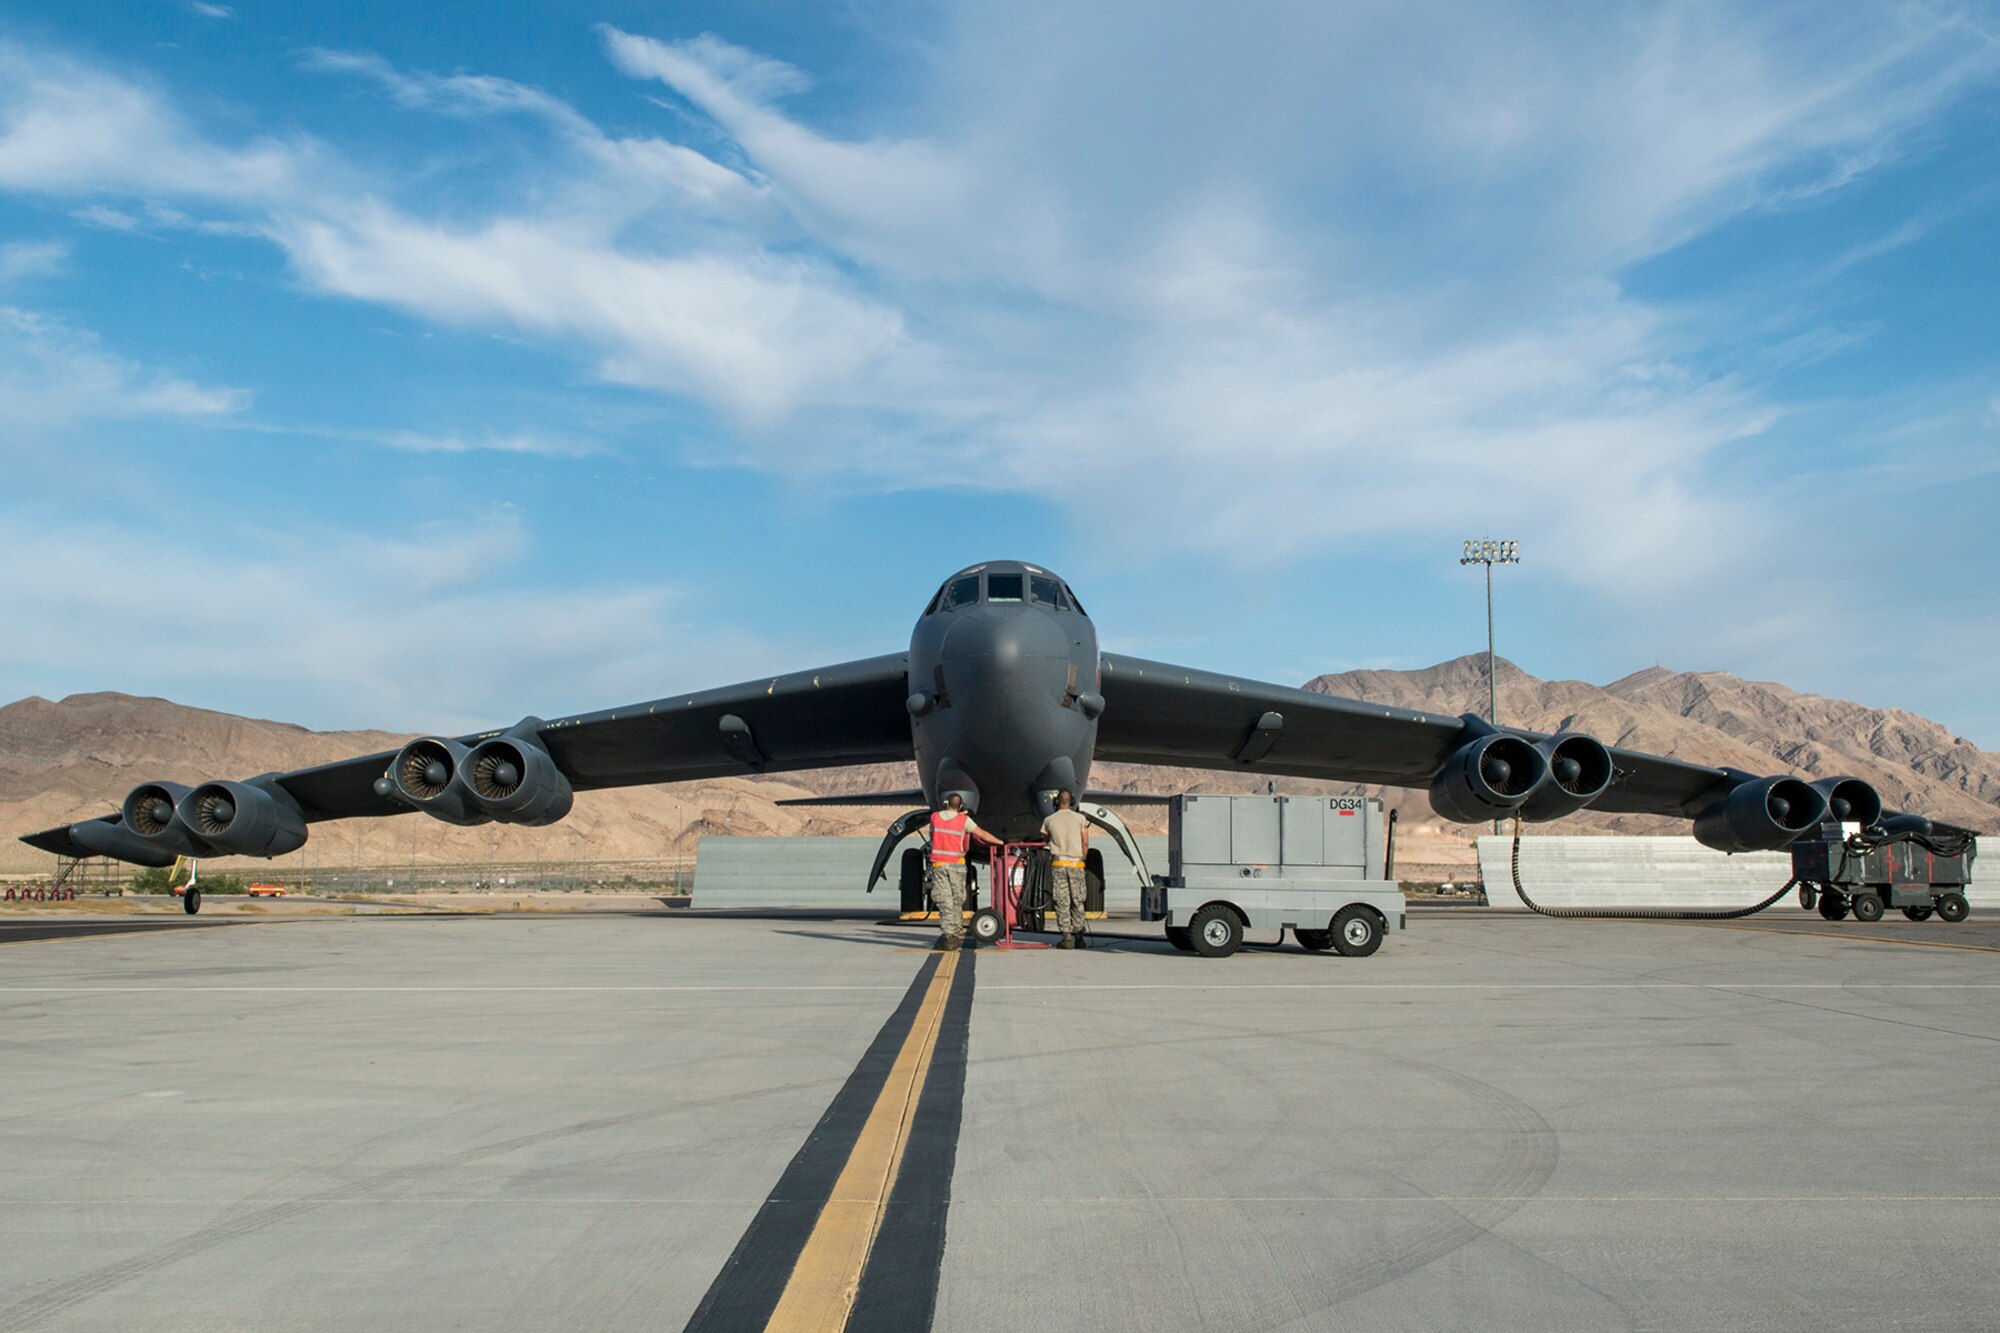 An Air Force Reserve B-52H Stratofortress sits ready to taxi for a mission in support of the 340th Weapons Squadron (WPS) on June 8, 2016, Nellis Air Force Base, Nev. The mission of the 340th WPS is an extension of the mission of the U.S. Air Force Weapons School, which is to provide graduate level instructor courses that provide the world’s most advanced training in weapons and tactics employment to Air Force officers. (U.S. Air Force photo by Master Sgt. Greg Steele/Released)